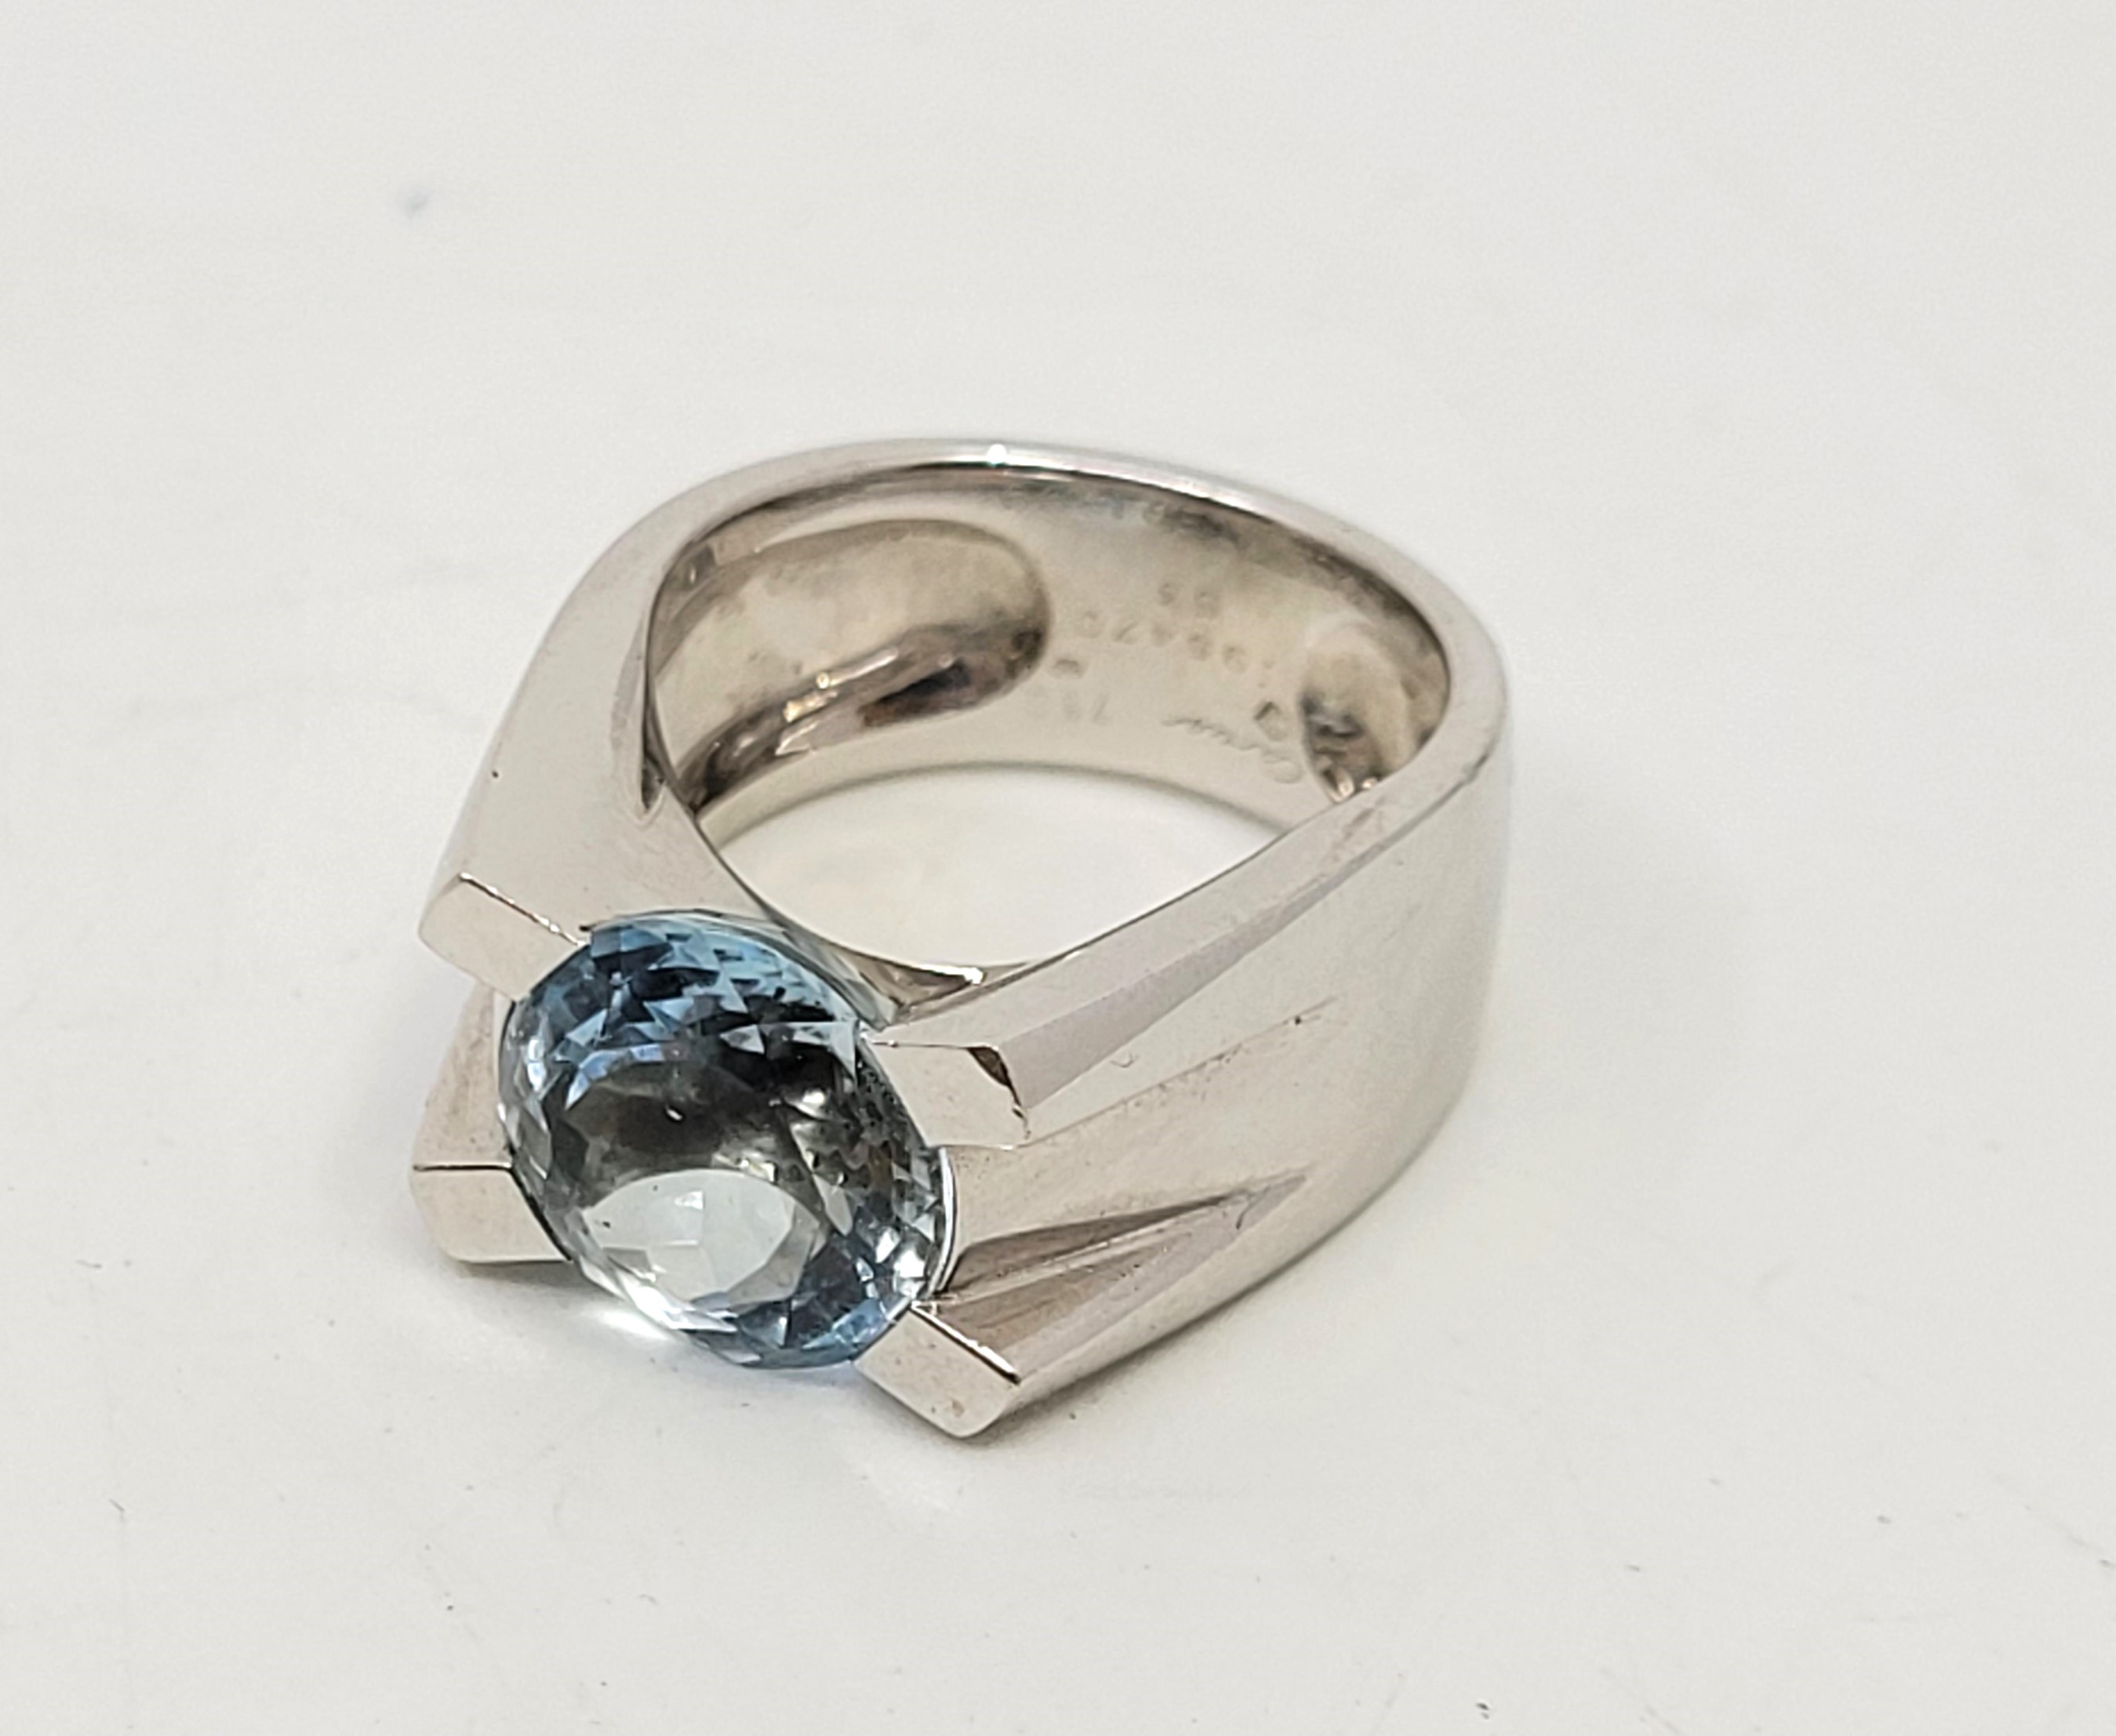 A Cartier 18ct. white gold and aquamarine ring, tension set mixed round cut aquamarine (stone